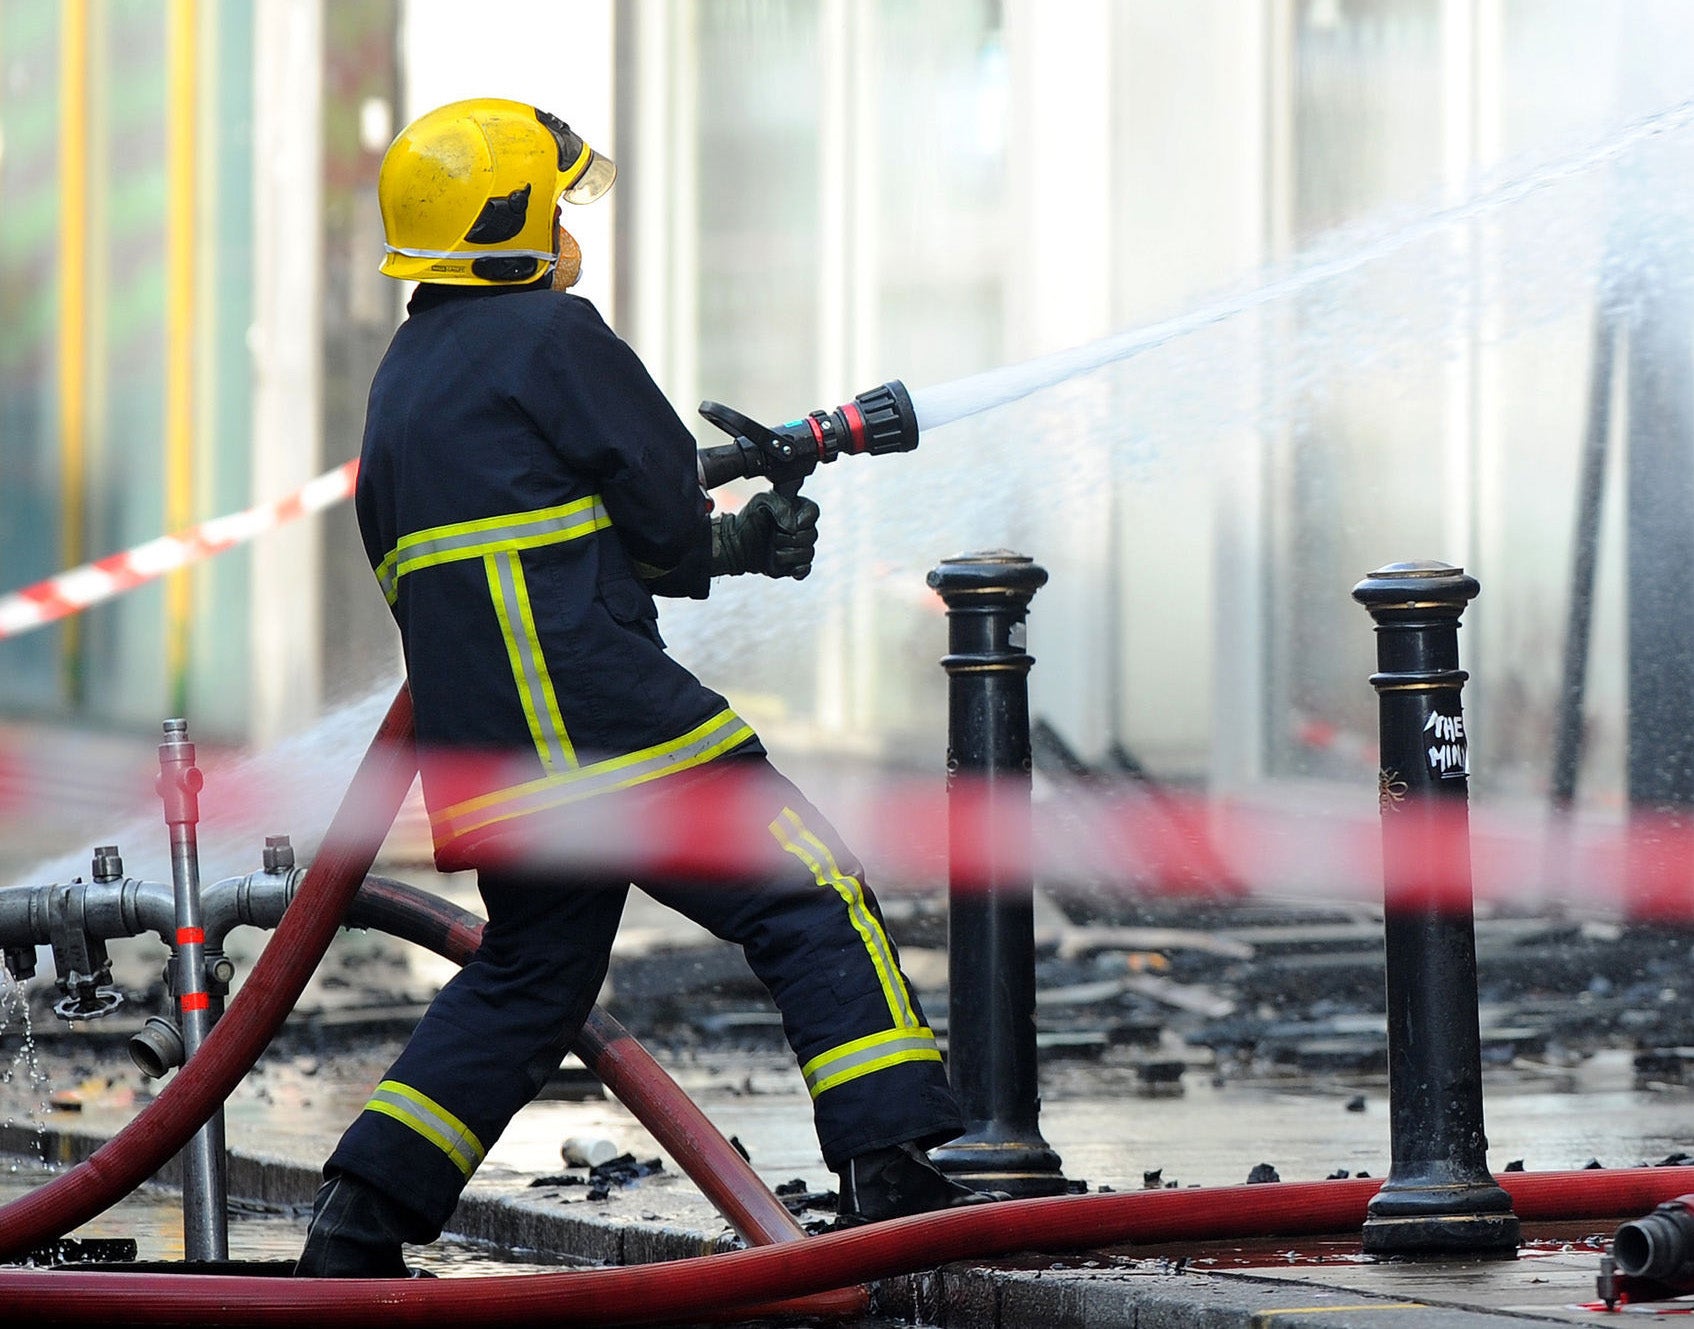 Sir Thomas Winsor said more change is ‘urgently required’ at fire services (PA)